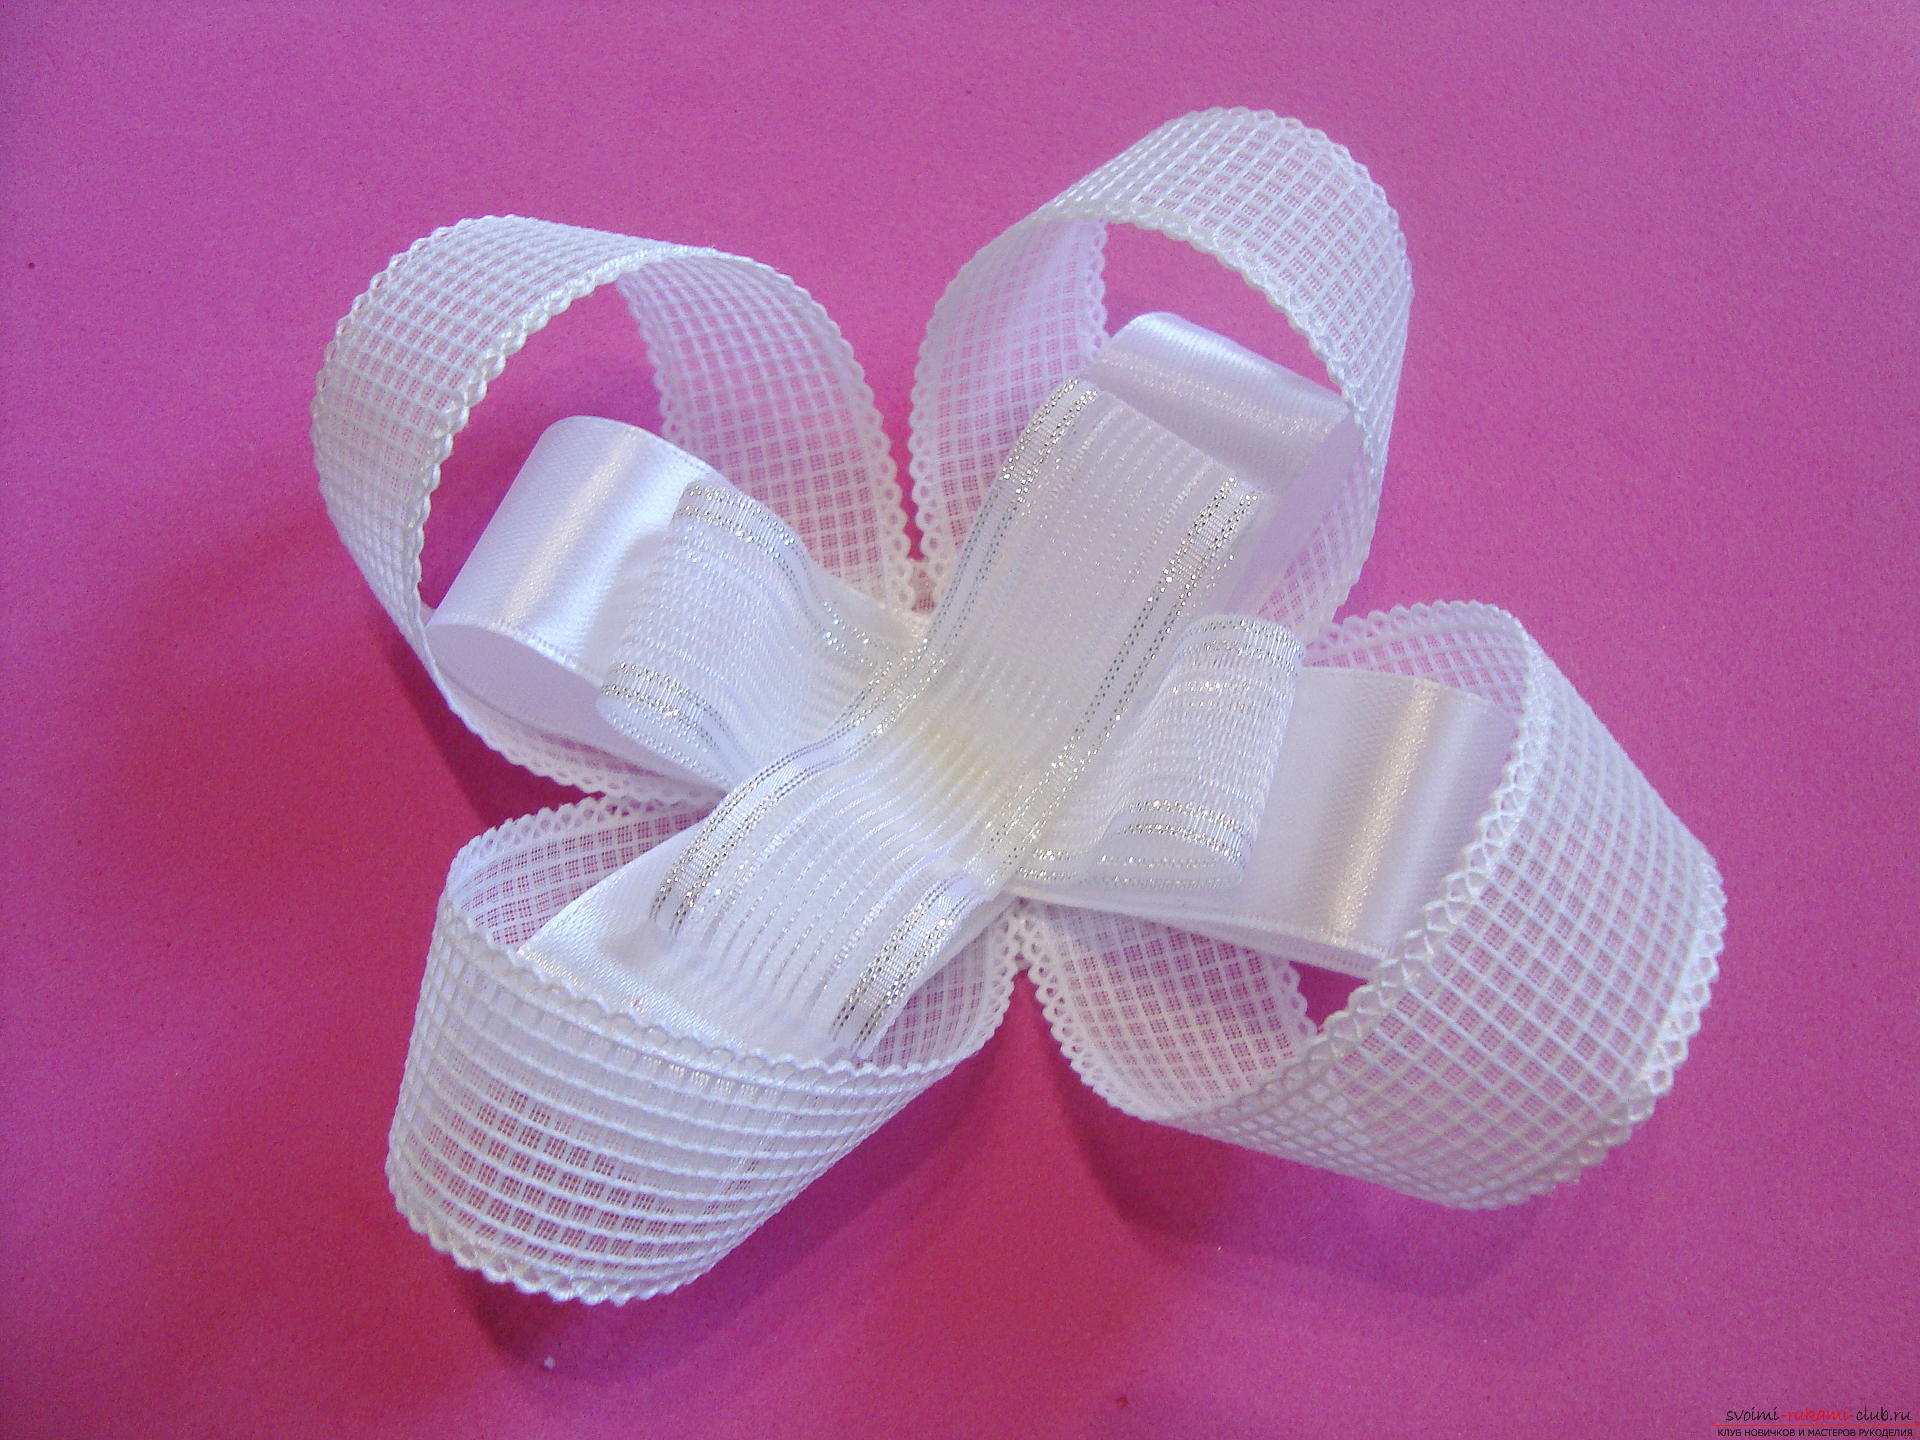 Step-by-step guide to making bows by September 1 for schoolgirls describing the steps and photos. Photo number 15